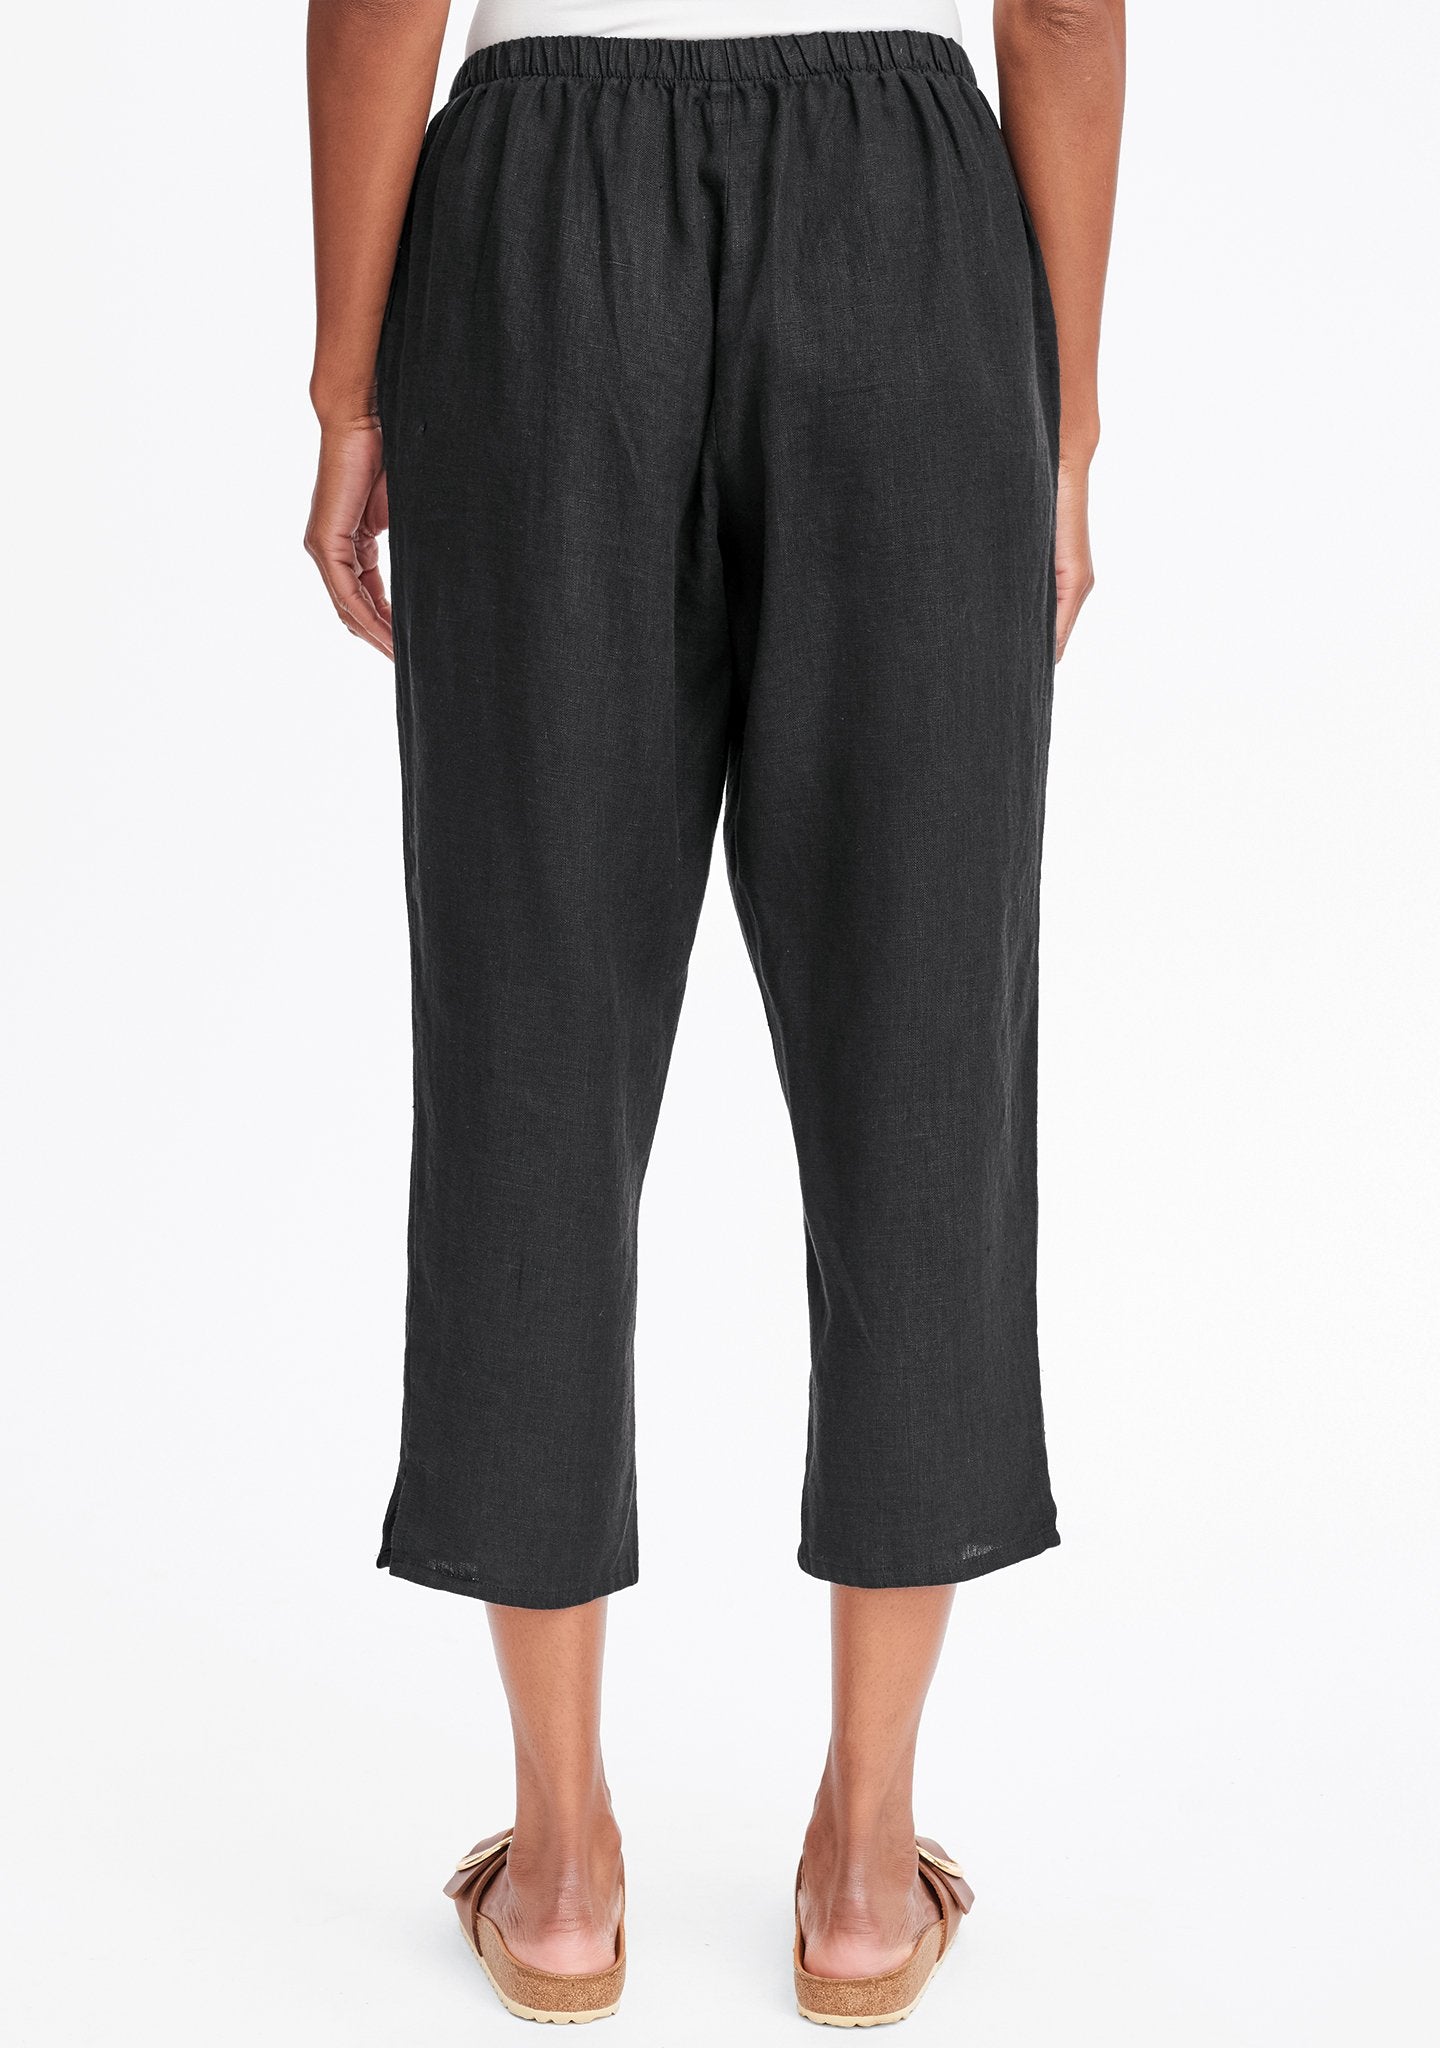 pocketed ankle pant linen pants details